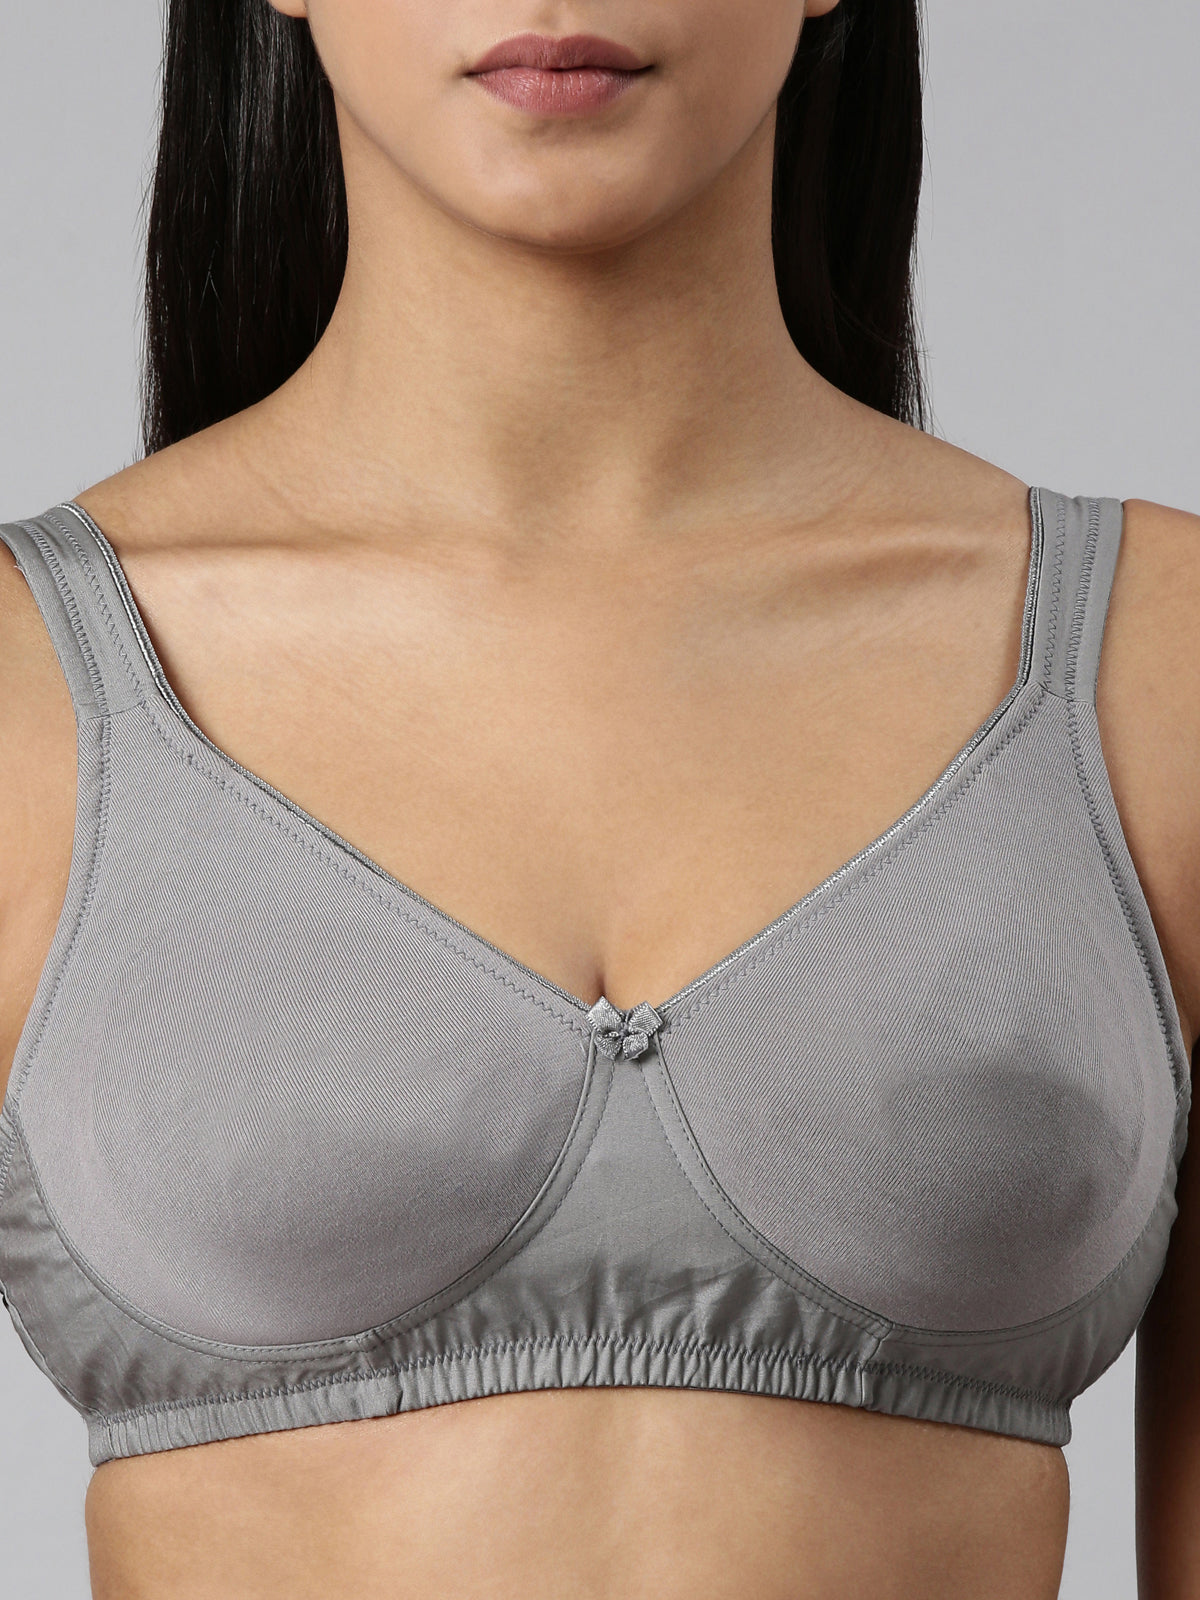 Blossom Inners - Gorgeous bra All-day, contoured, medium coverage